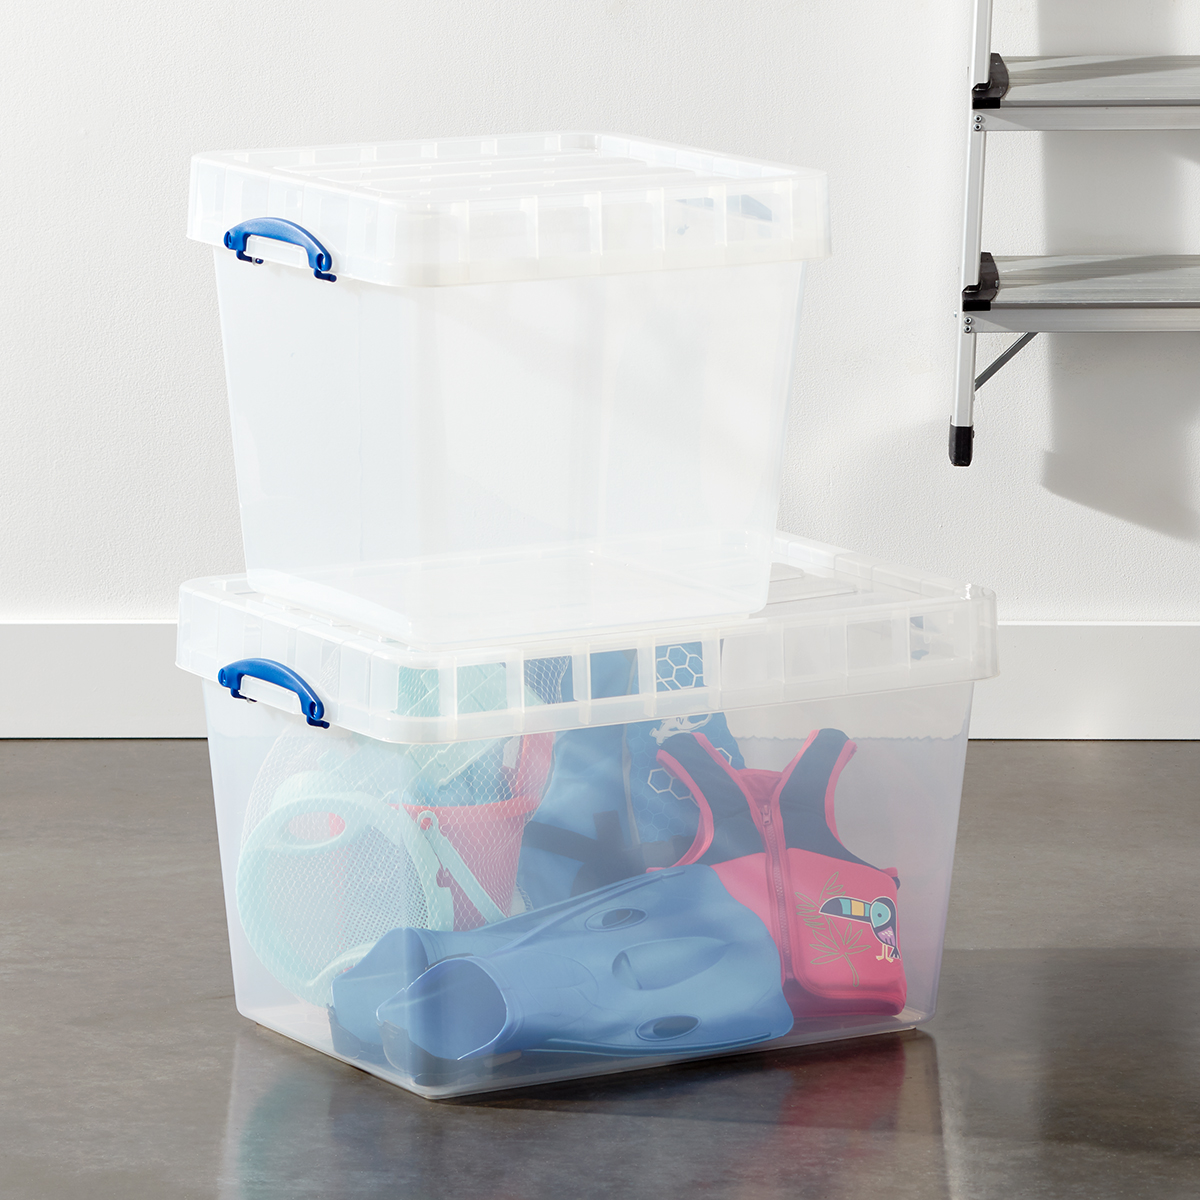 https://www.containerstore.com/catalogimages/400255/10081545g-premier-modular-tote.jpg